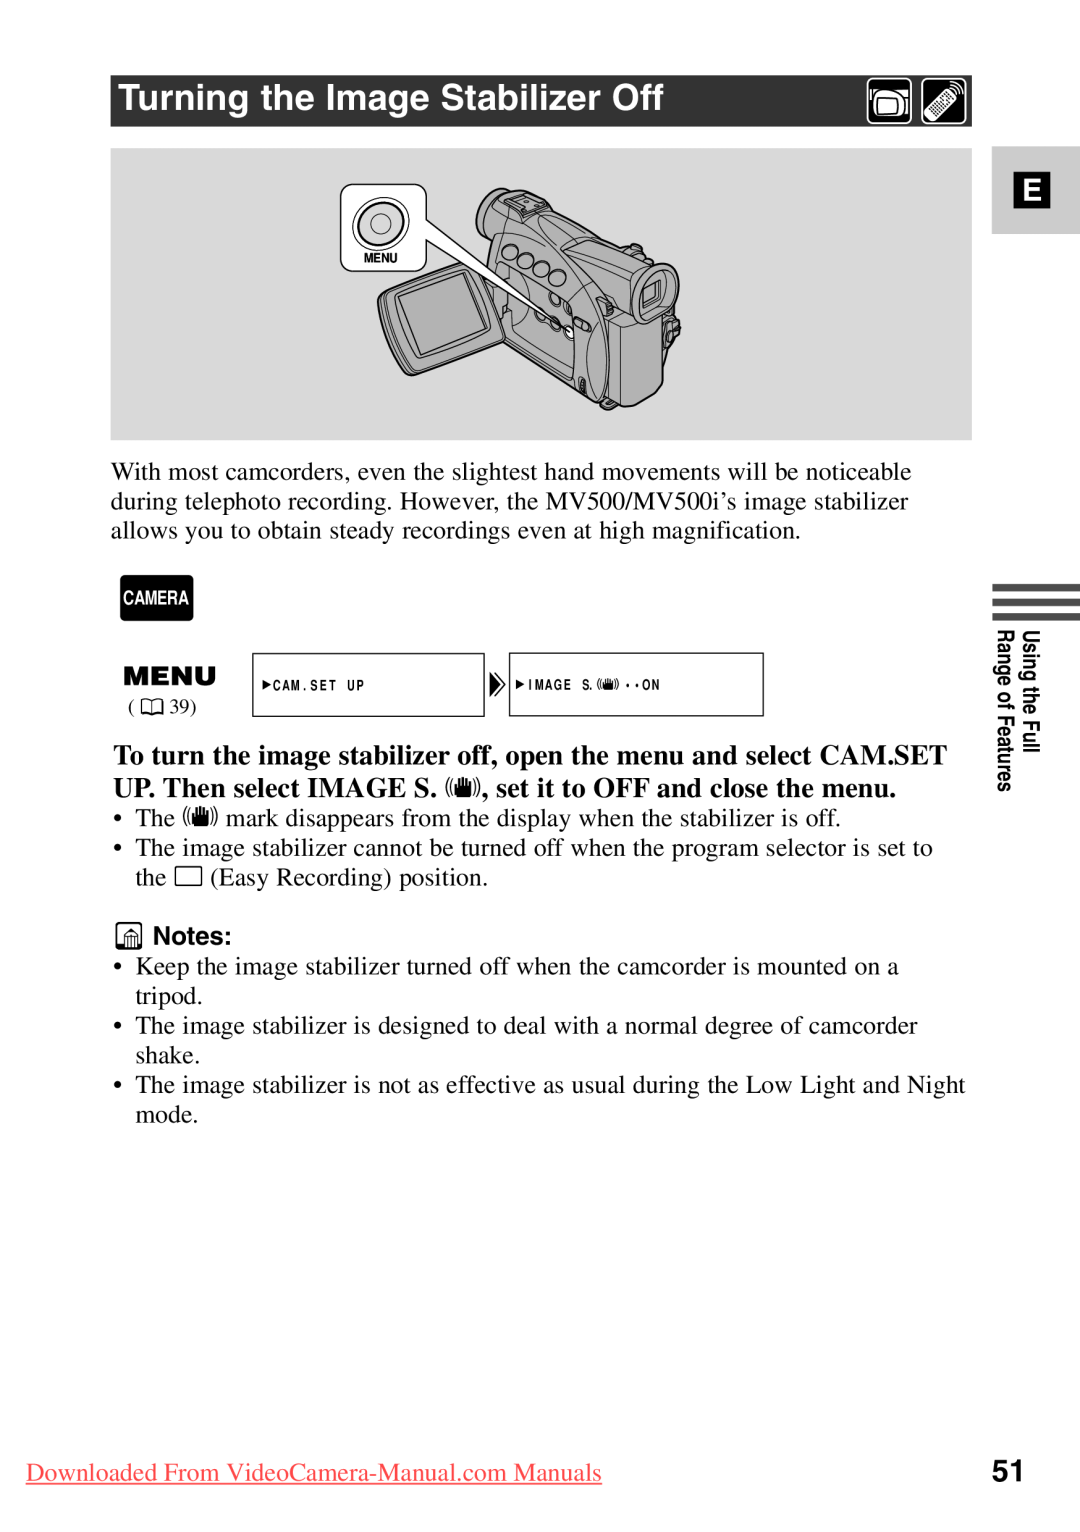 Canon 7561A001, MV500i instruction manual Turning the Image Stabilizer Off, Downloaded From VideoCamera-Manual.com Manuals 